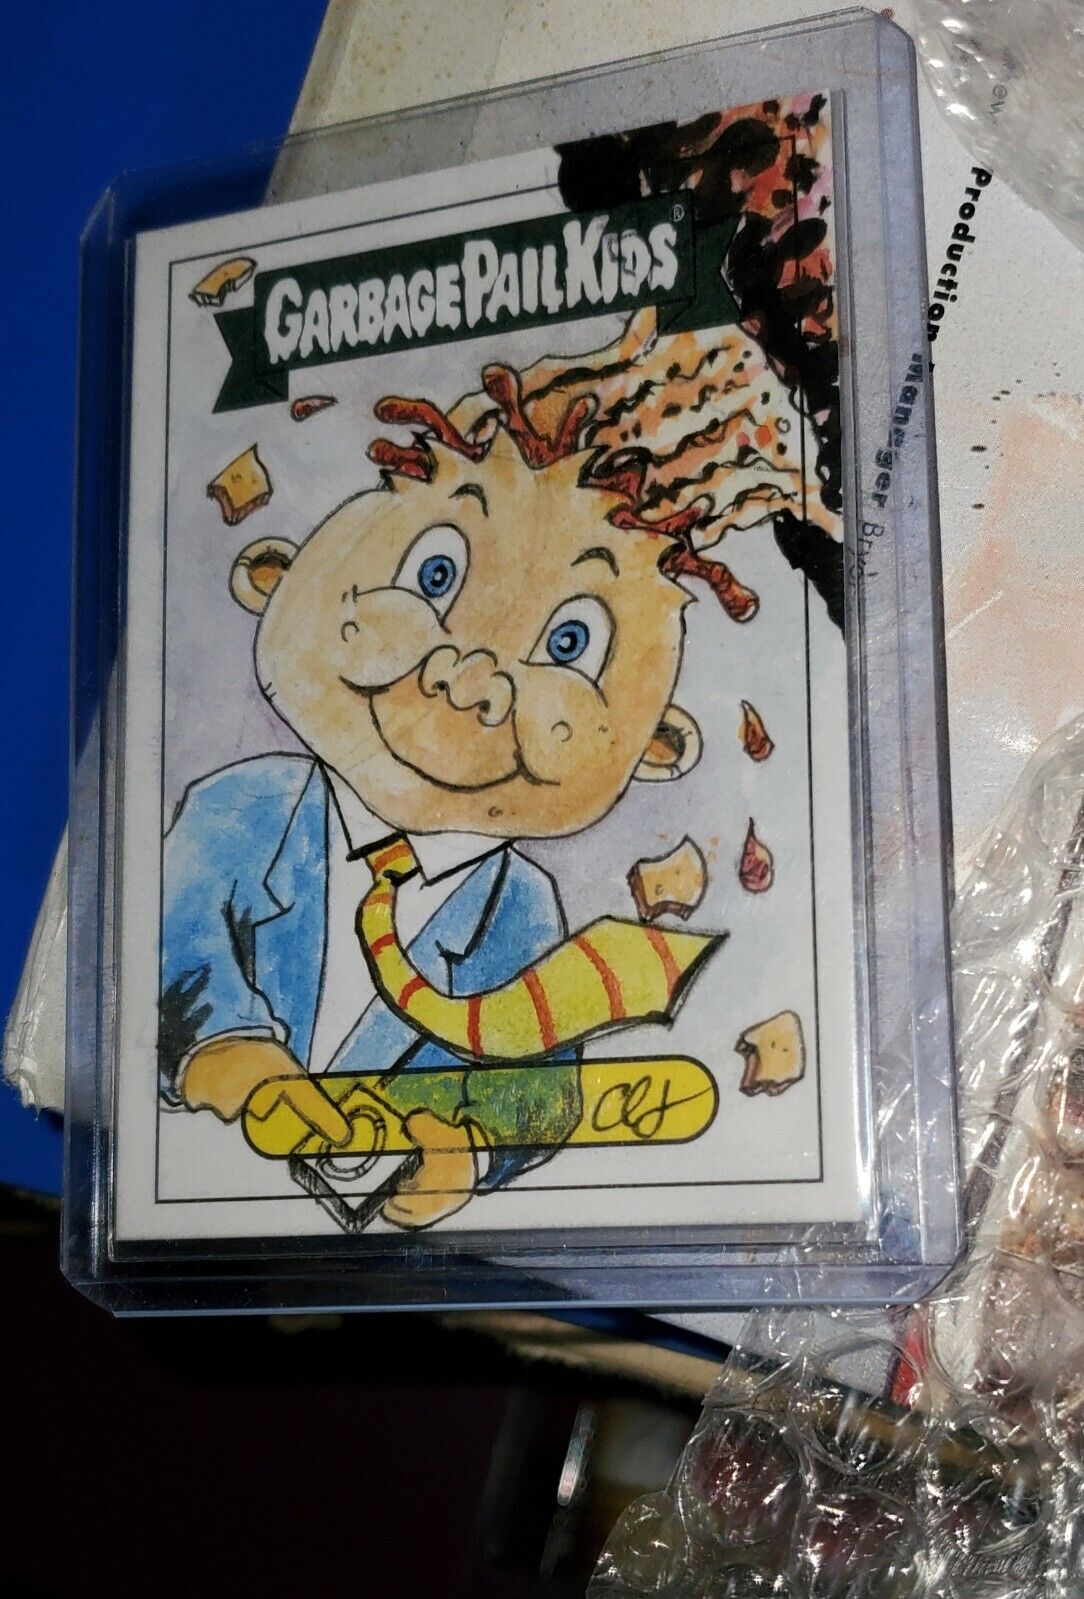 Garbage Pail Kids RAREST REAL ADAM BOMB FULL SKETCH CARD AUTO LAYERED MUStc MINT